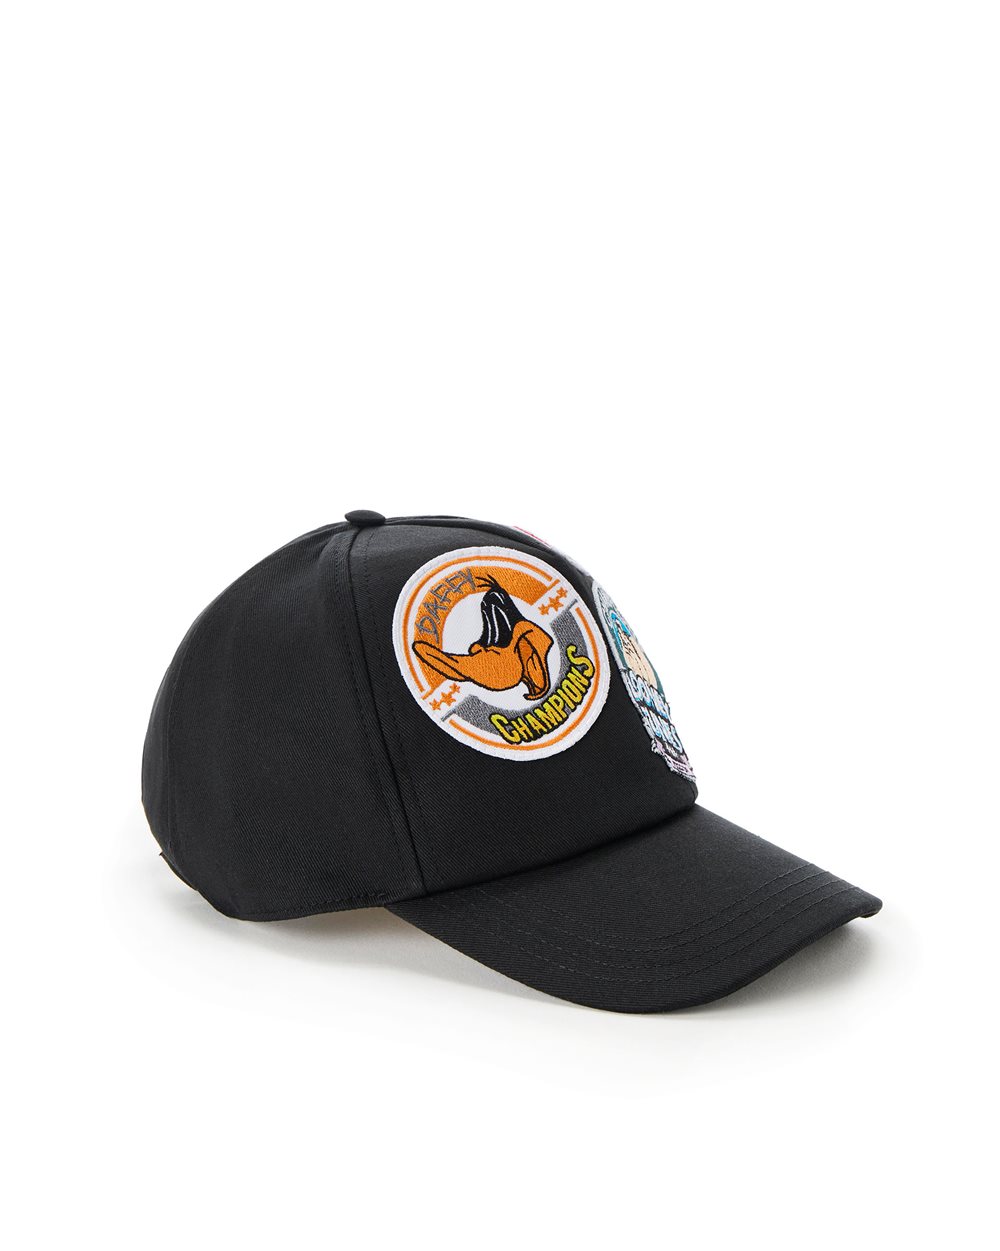 Baseball cap with cartoon patches and logo - ( PRIMO STEP IT ) PROMO SALDI UP TO 40% | Iceberg - Official Website